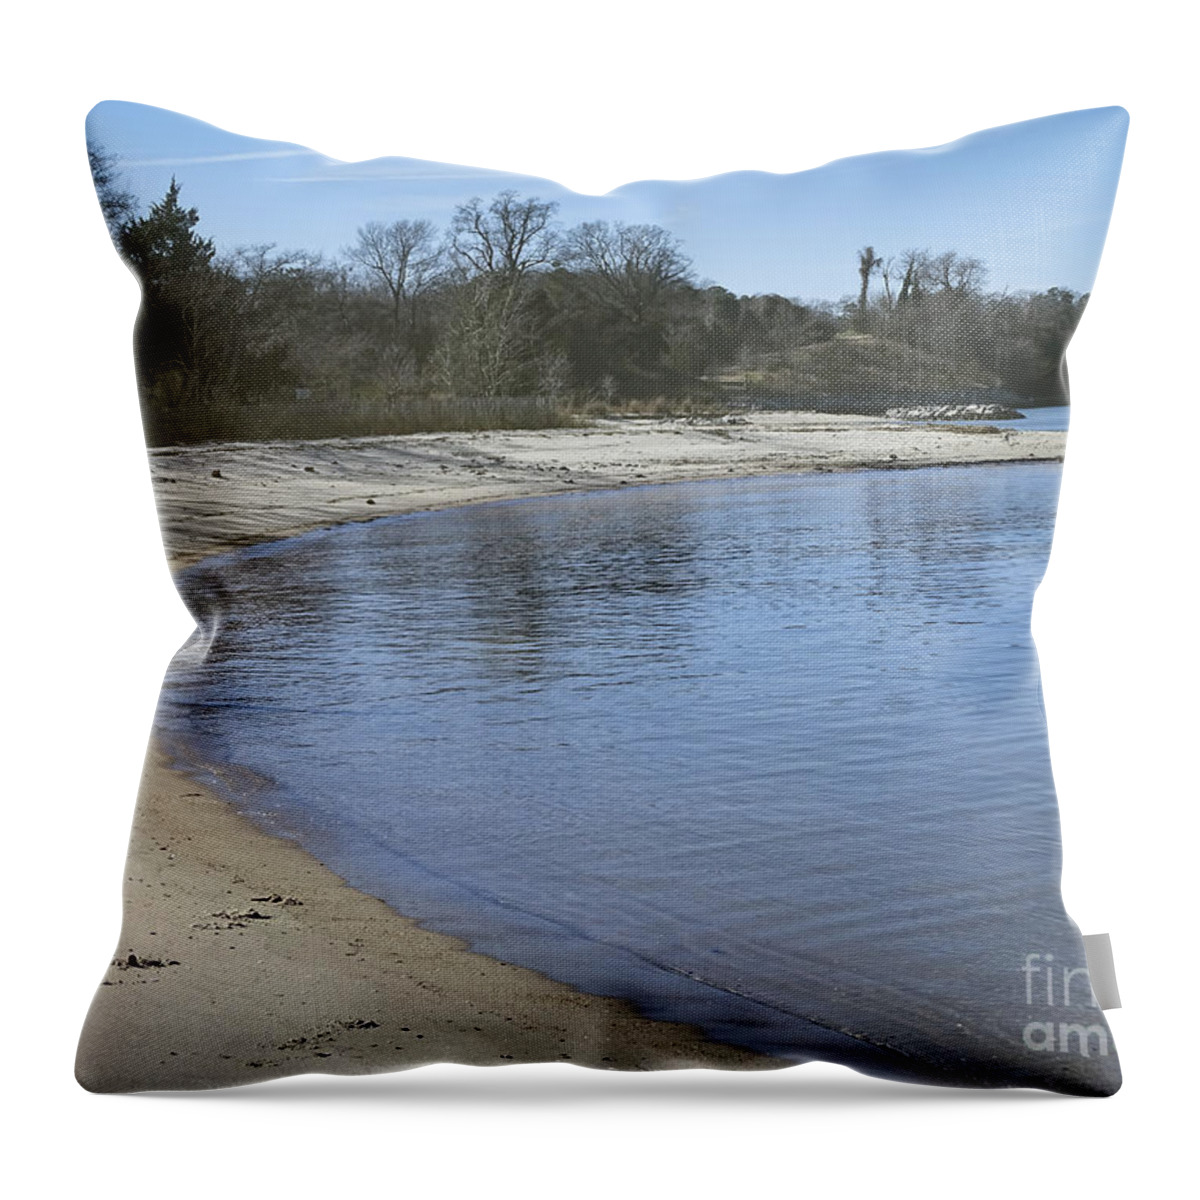  Throw Pillow featuring the photograph York River by Melissa Messick